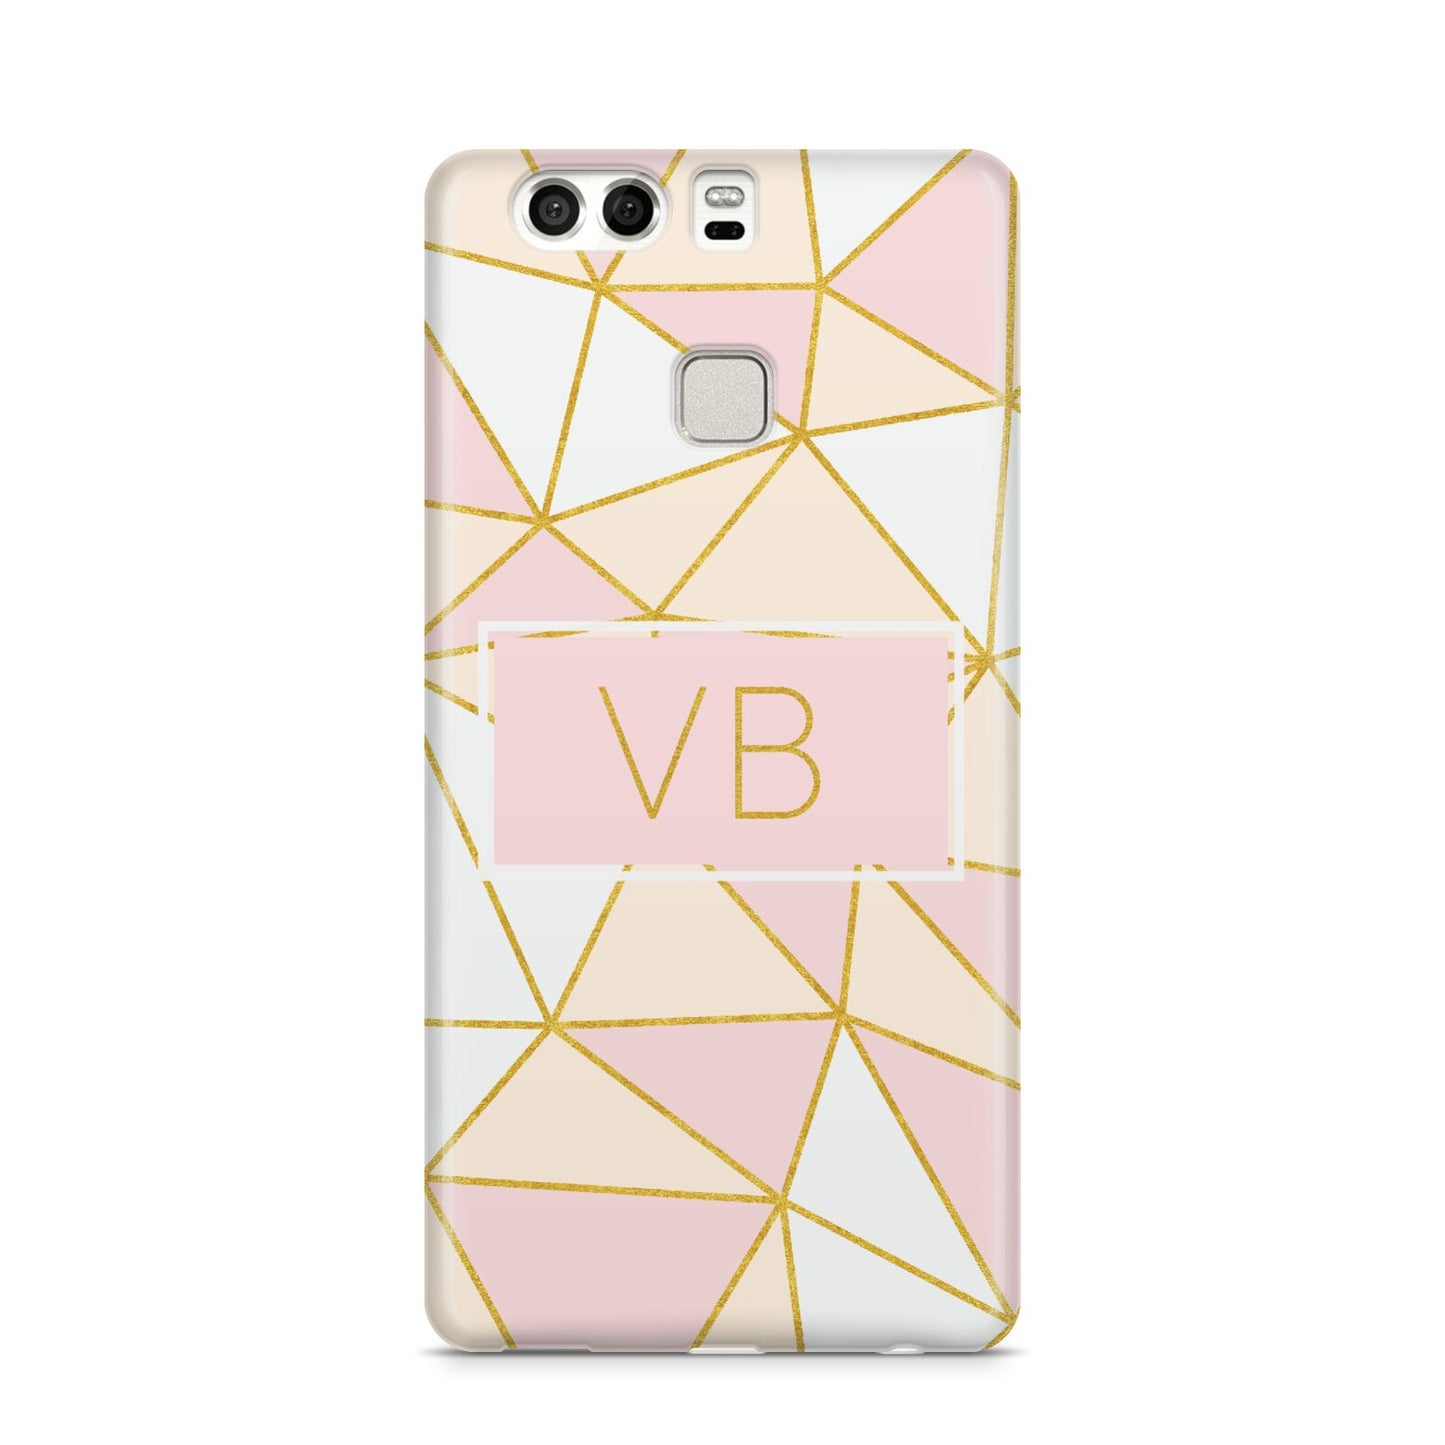 Personalised Gold Initials Geometric Huawei P9 Case